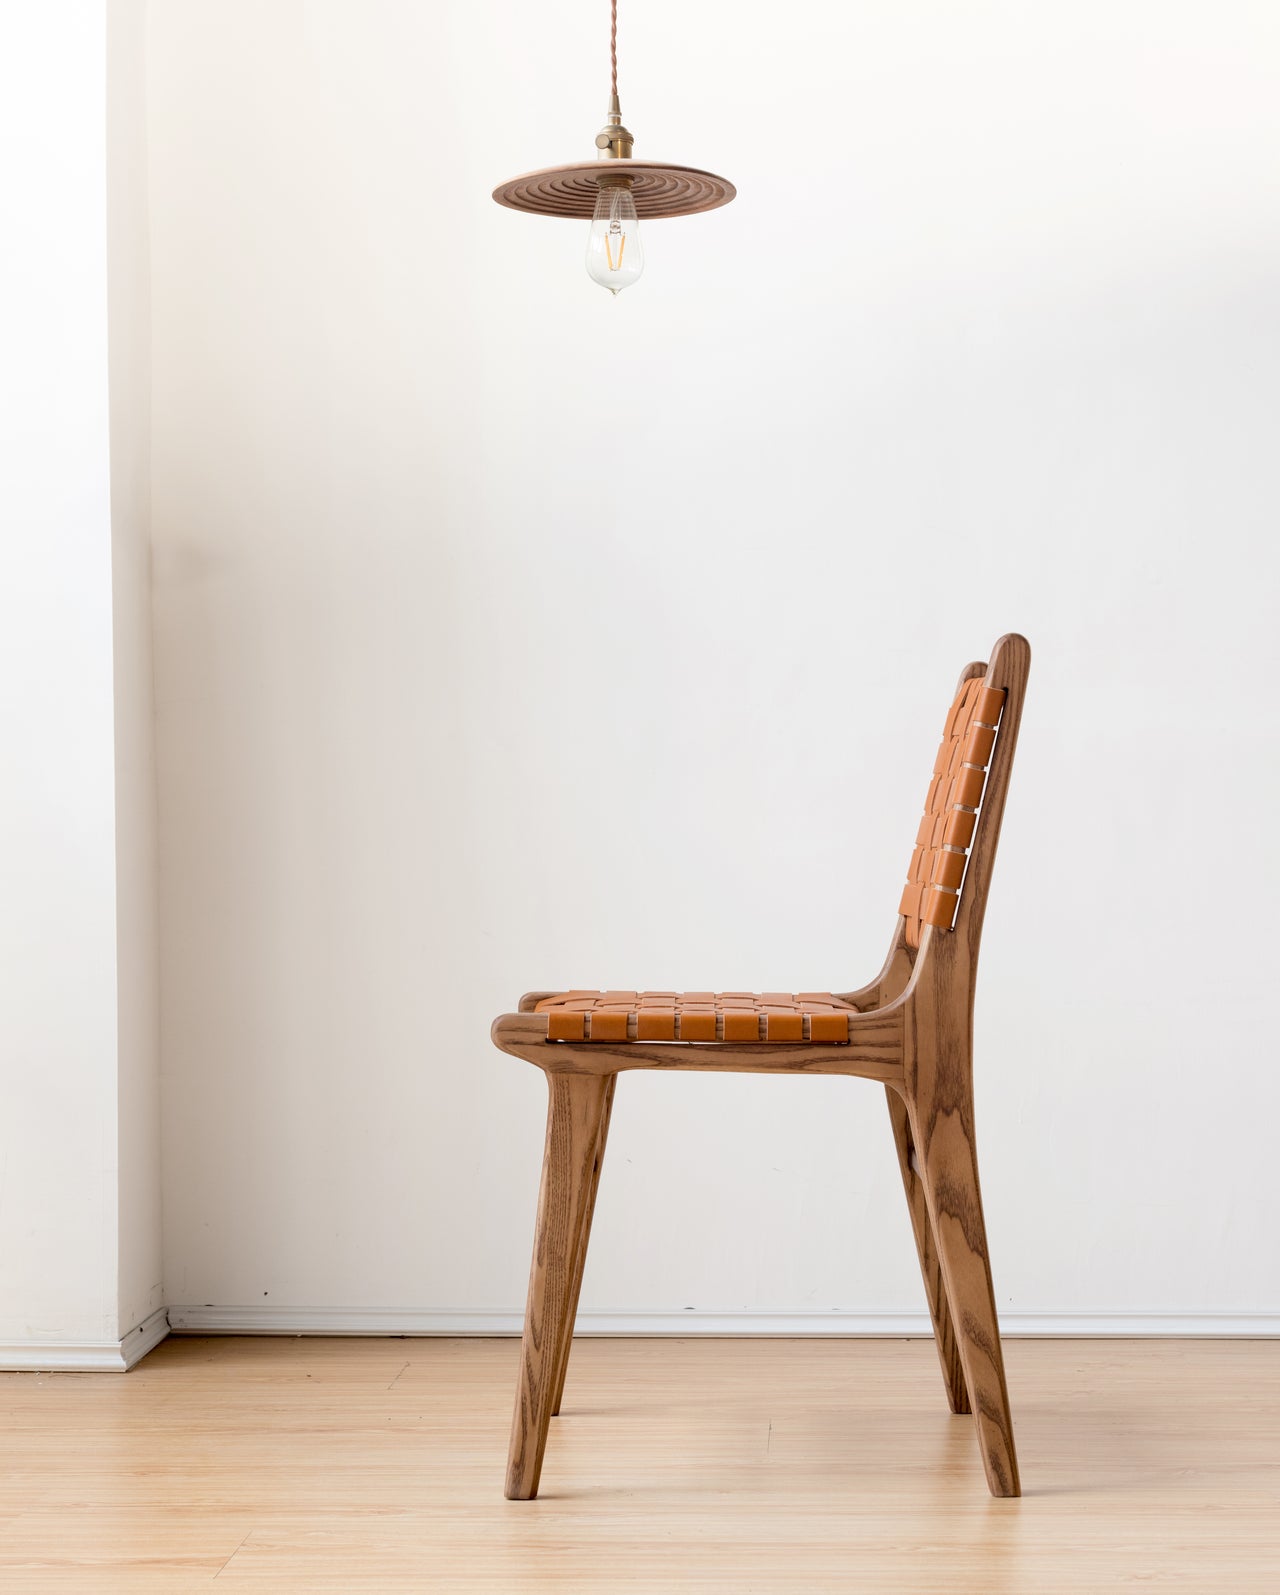 Solid Ash Wood & Leather Dining Chair | Reading Chair for Minimalistic Living